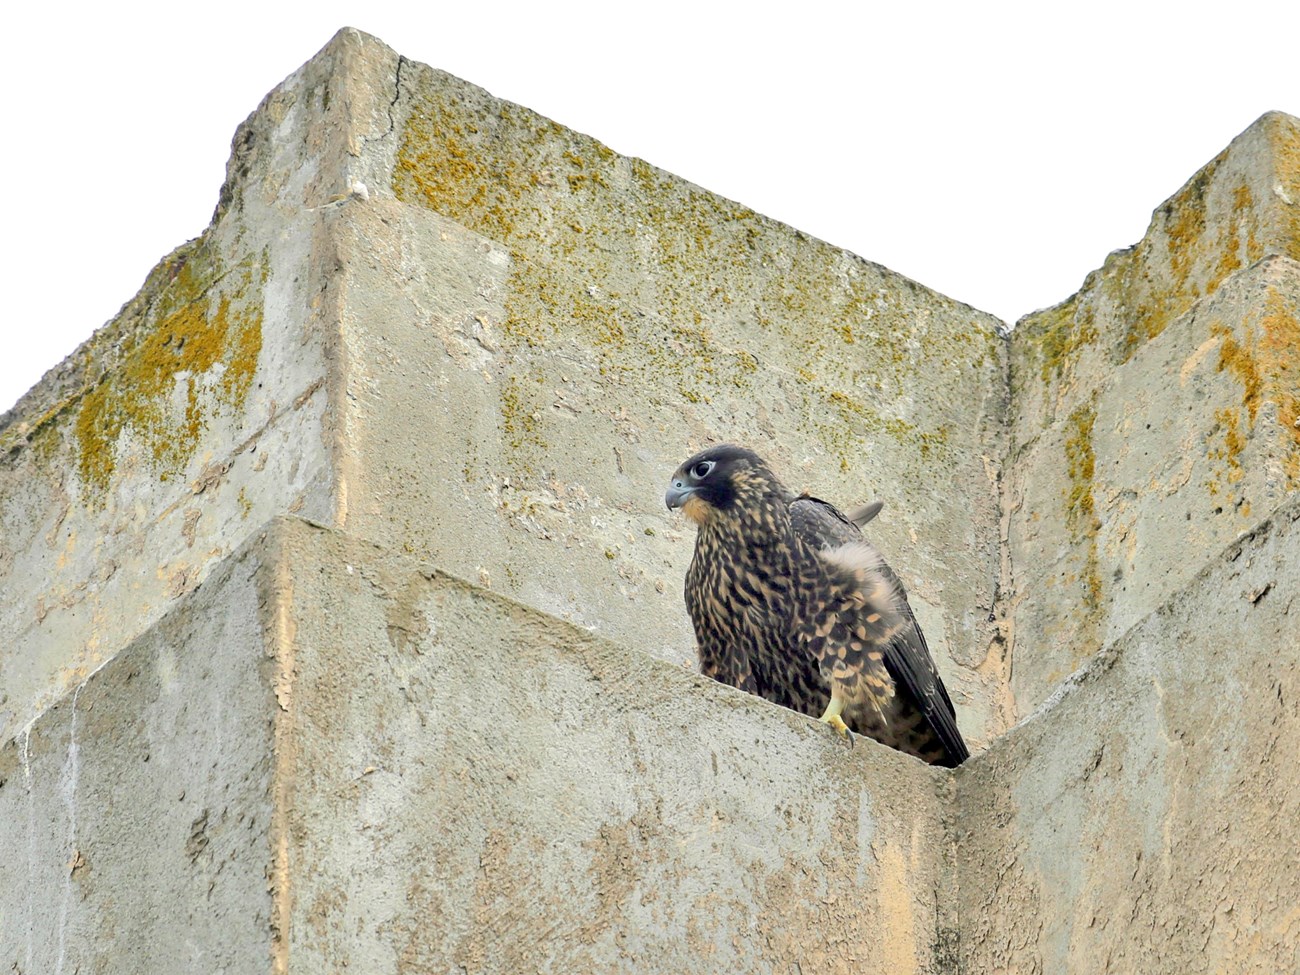 Dark and light brown bird of prey perched on a building ledge.